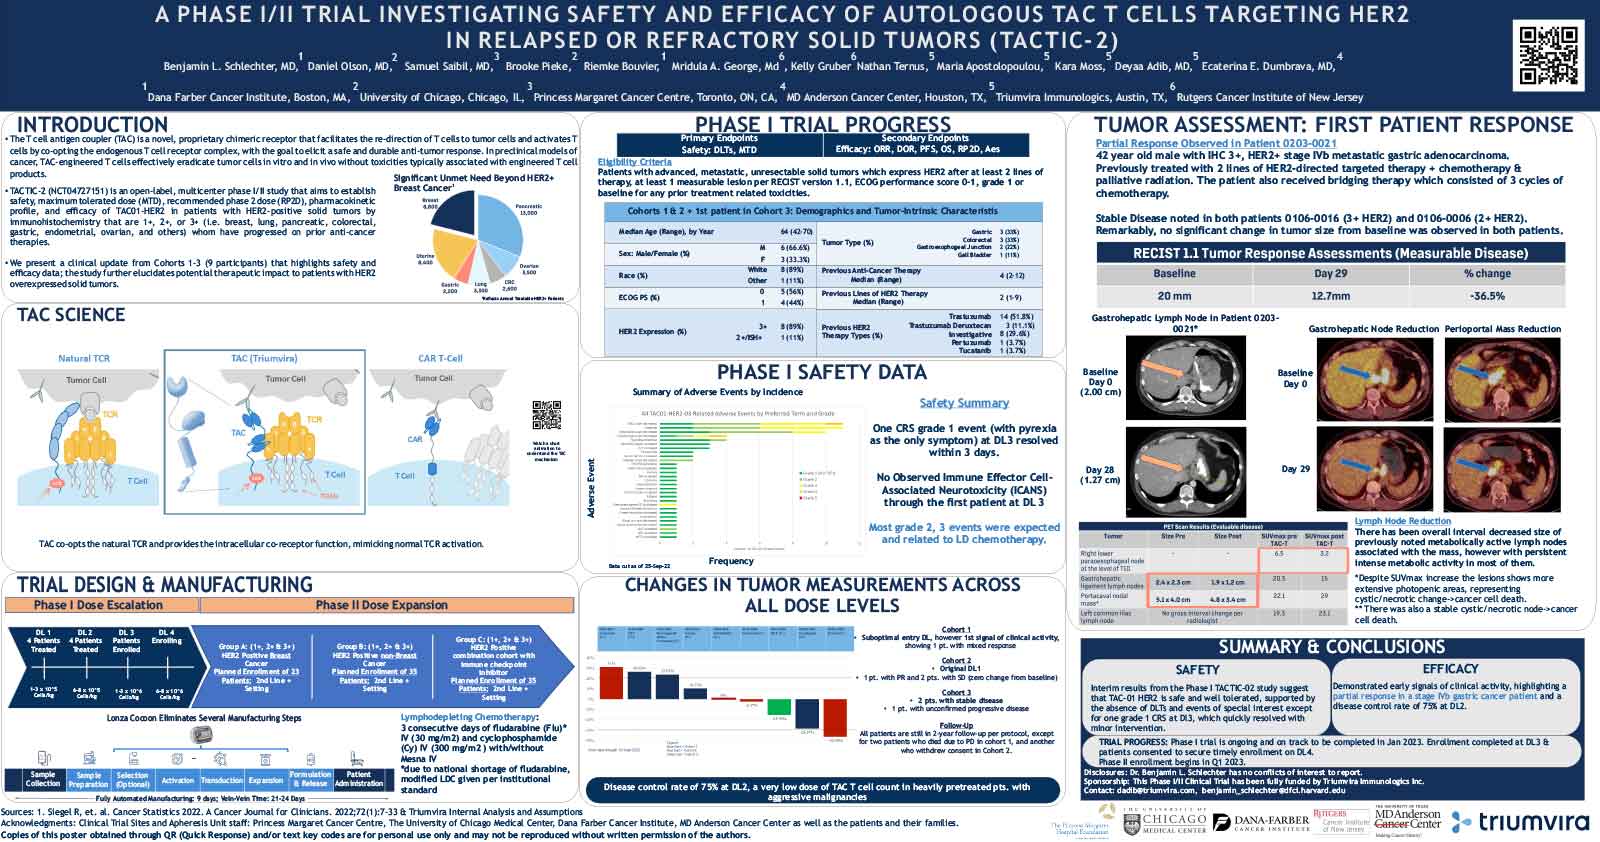 A Phase I/II Trial Investigation Safety and Efficacy of Autologous TAC T Cells Targeting HER2 in Relapsed or Refactory Solid Tumors (Tactic-2)